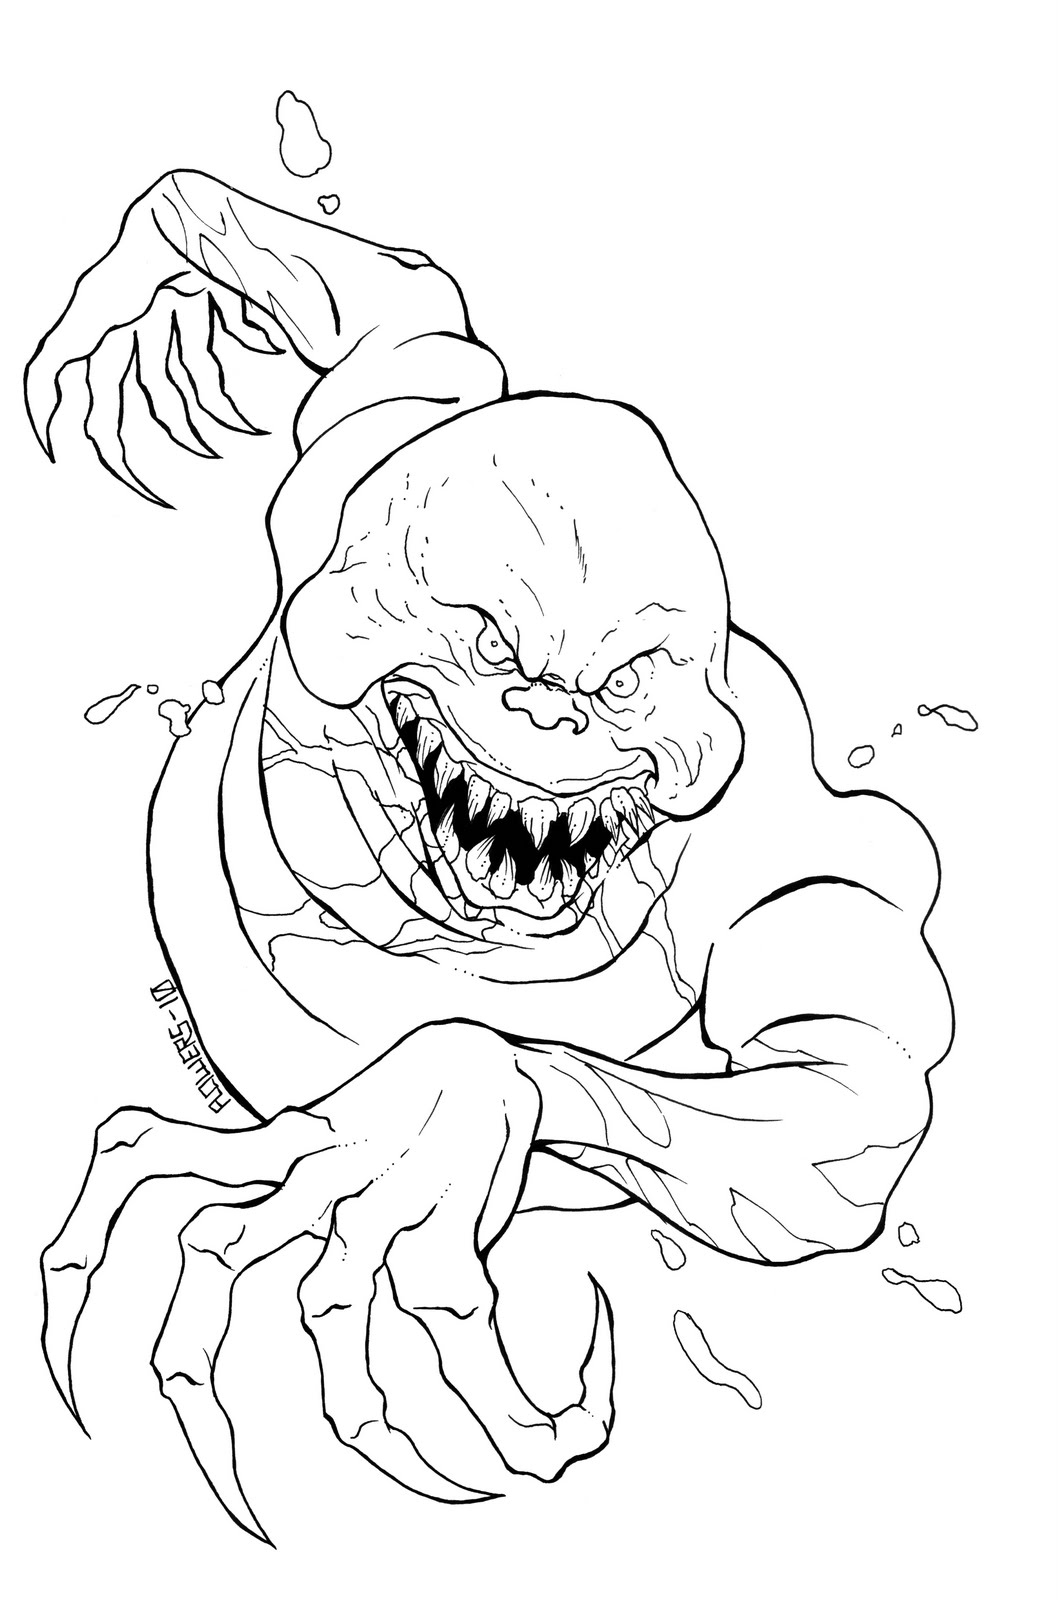 Creepy Printable Coloring Pages